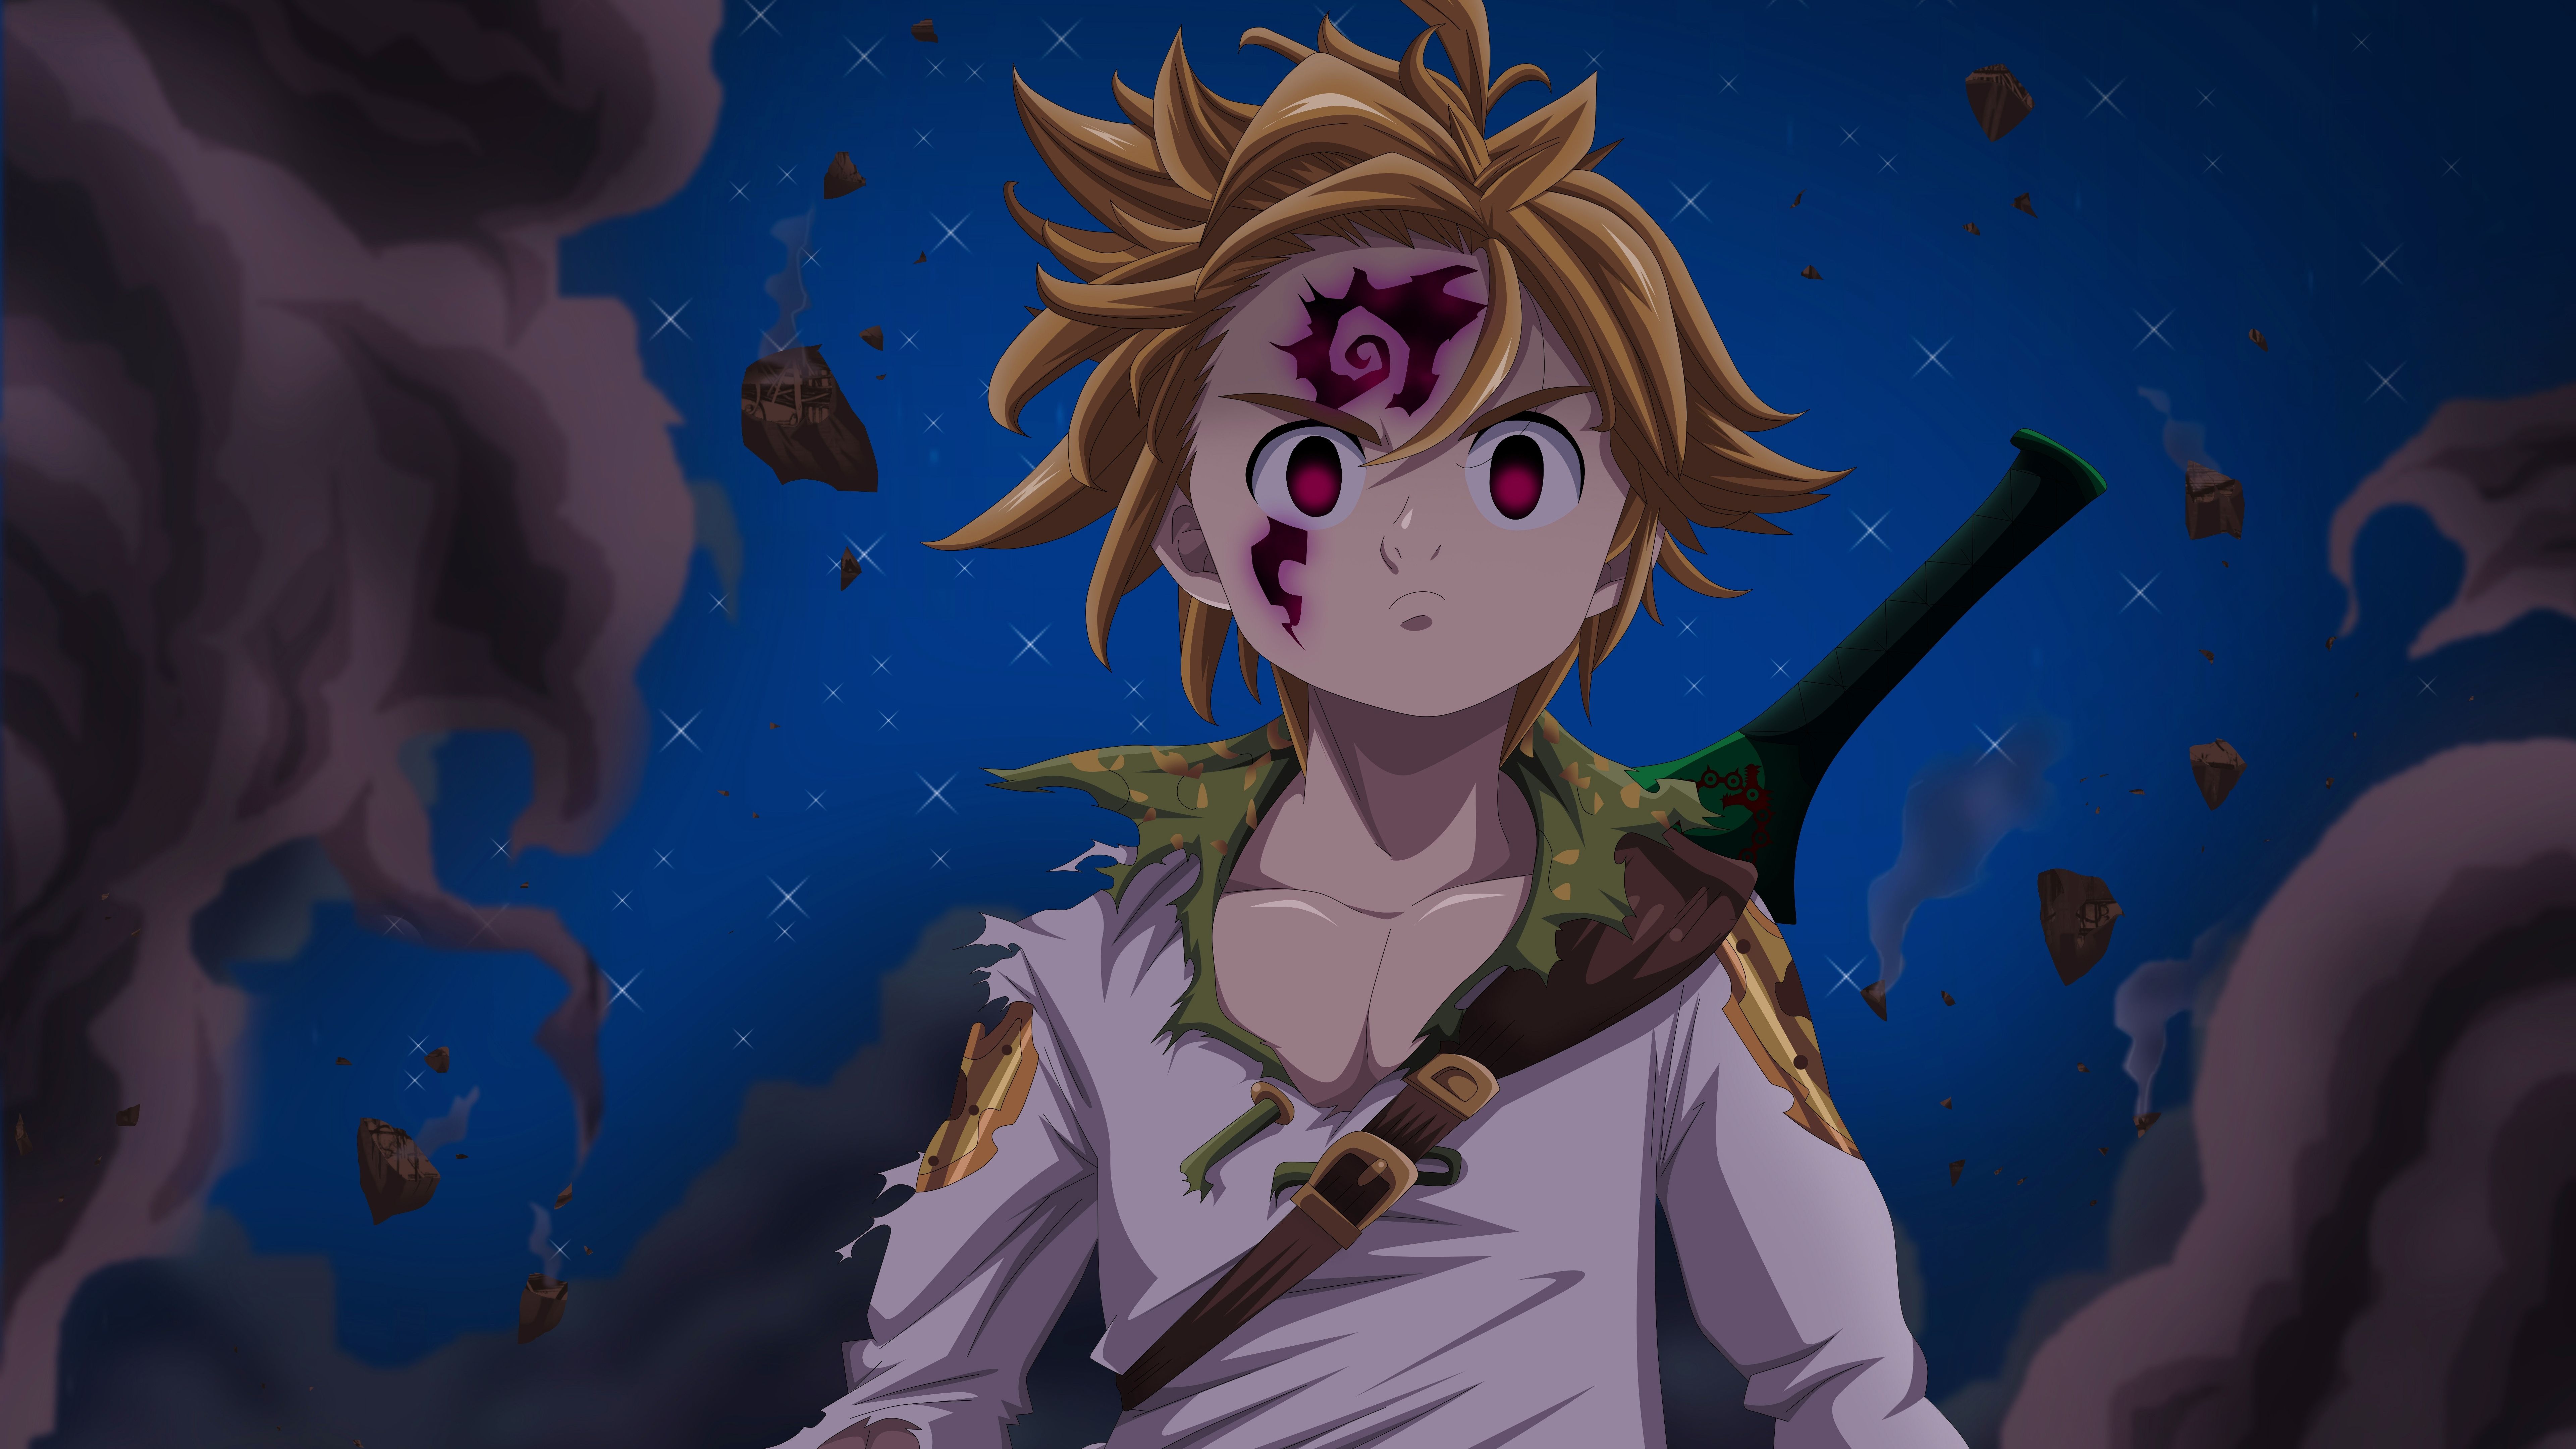 Meliodas From Demon The Seven Deadly Sins Wallpaper, HD Anime 4K Wallpaper, Image, Photo and Background